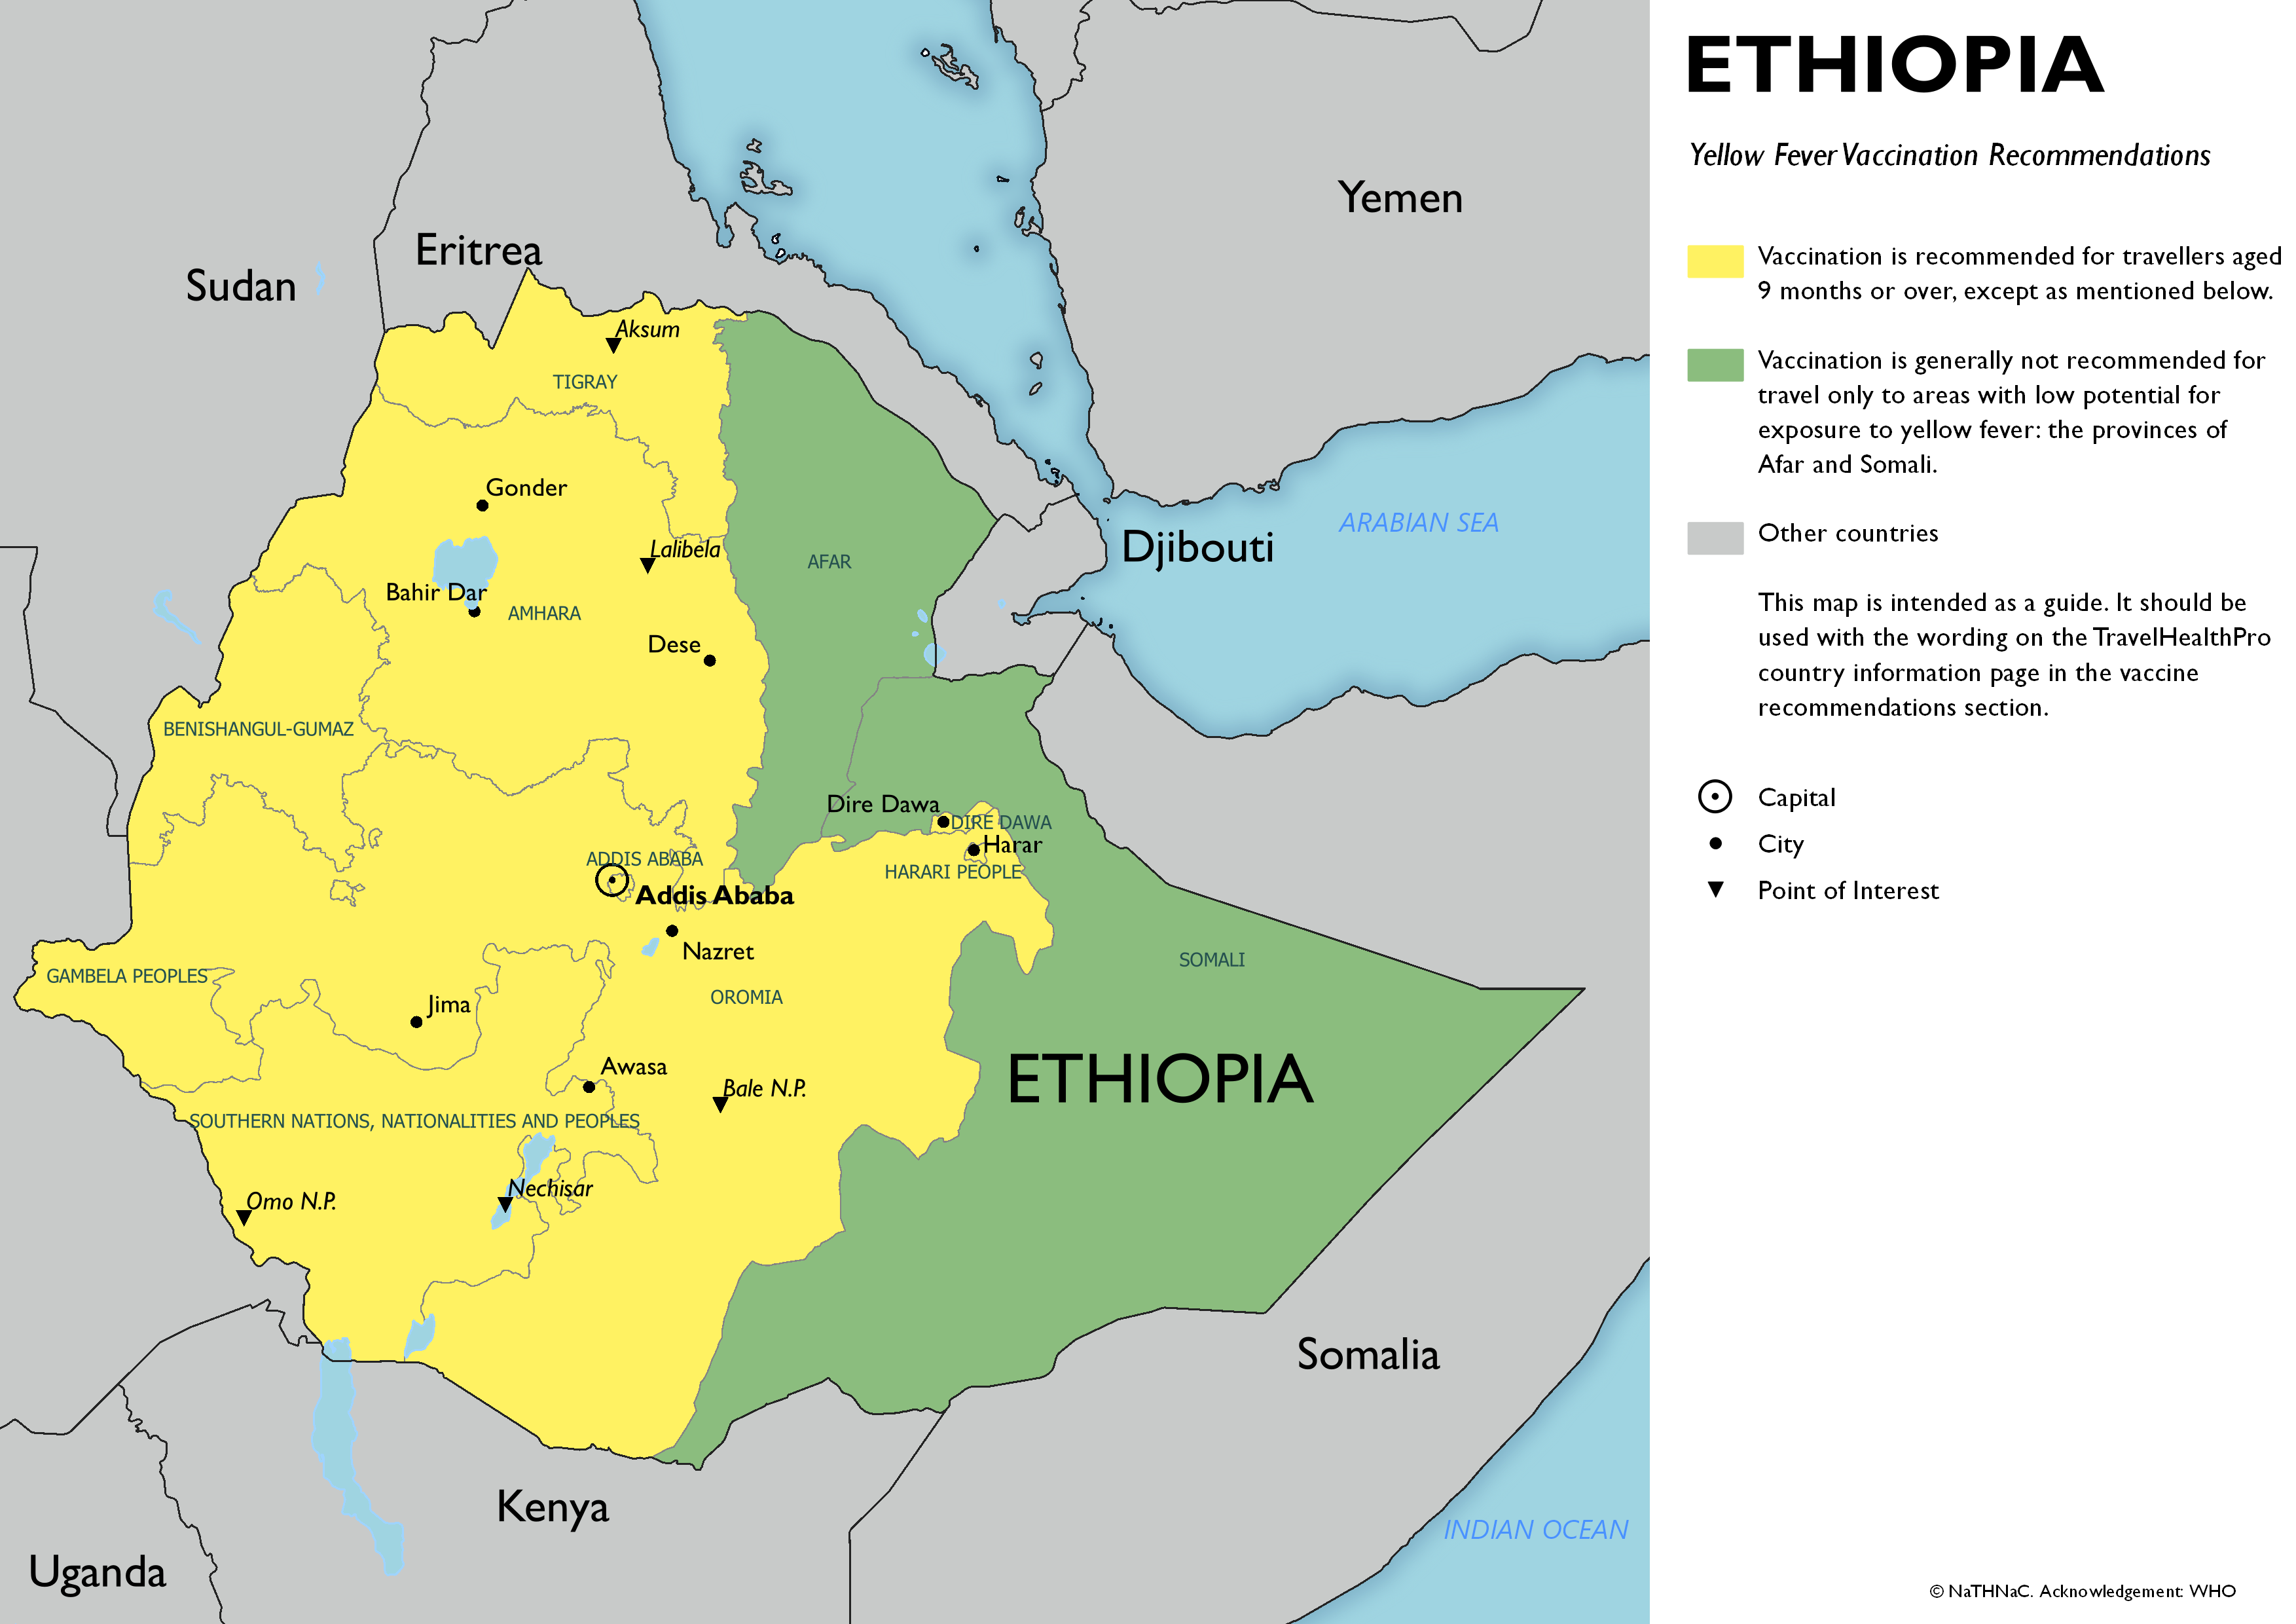 Yellow fever vaccine recommendation map for Ethiopia